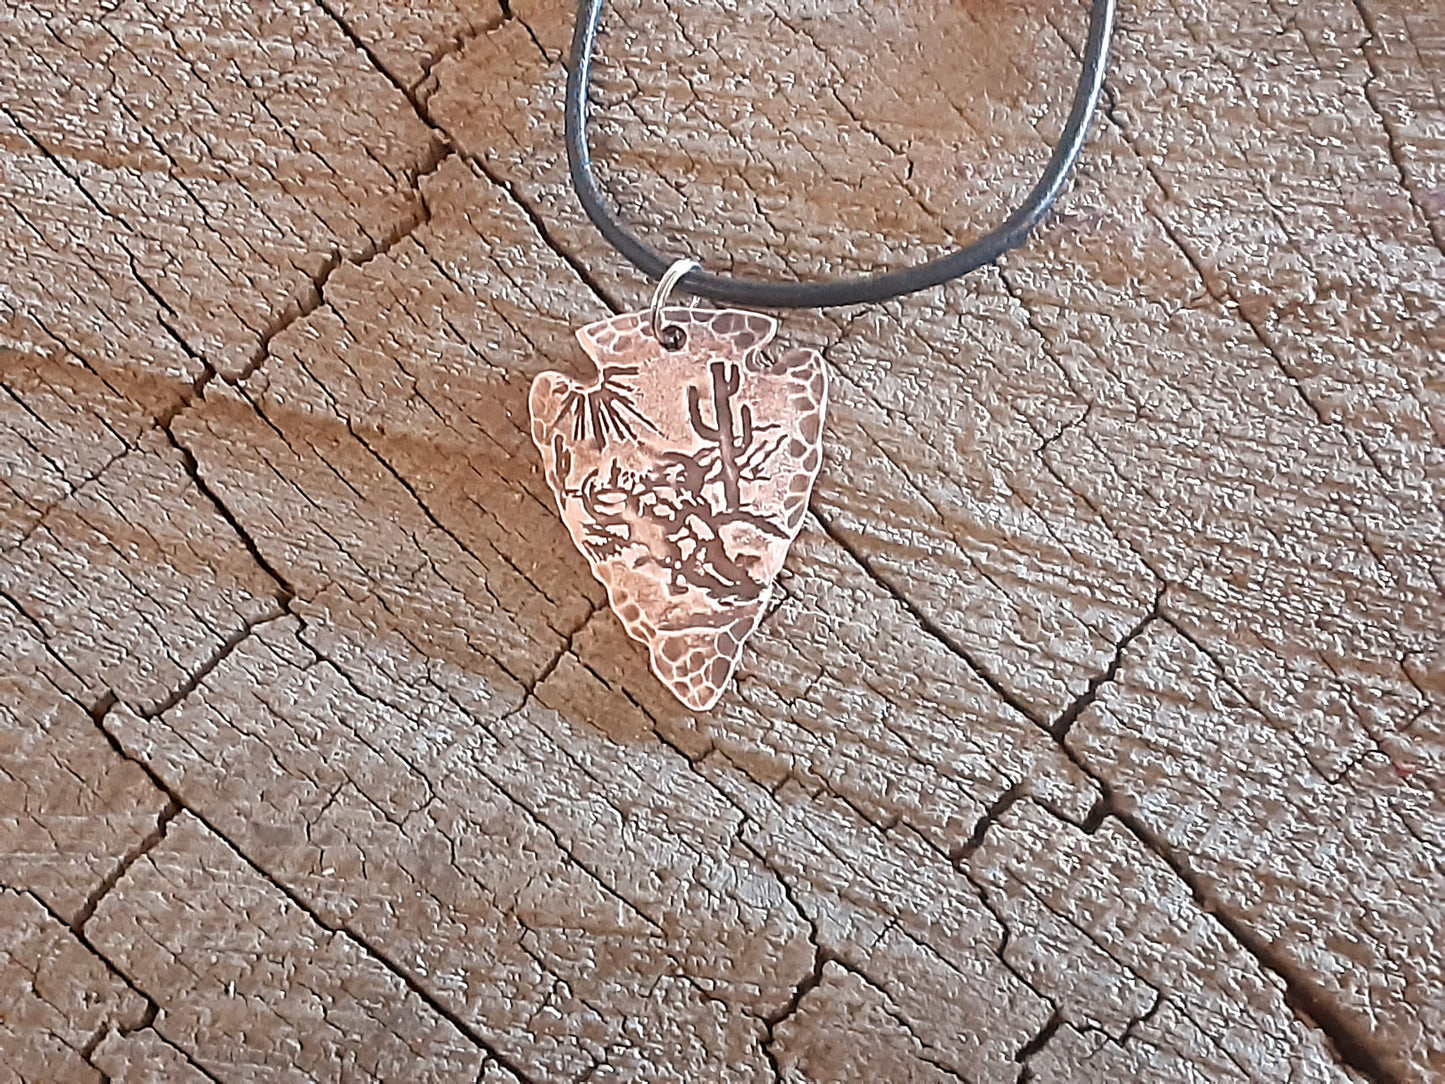 copper arrowhead necklace with desert scene - hammered and rustic finish - mens gift - mens jewelry